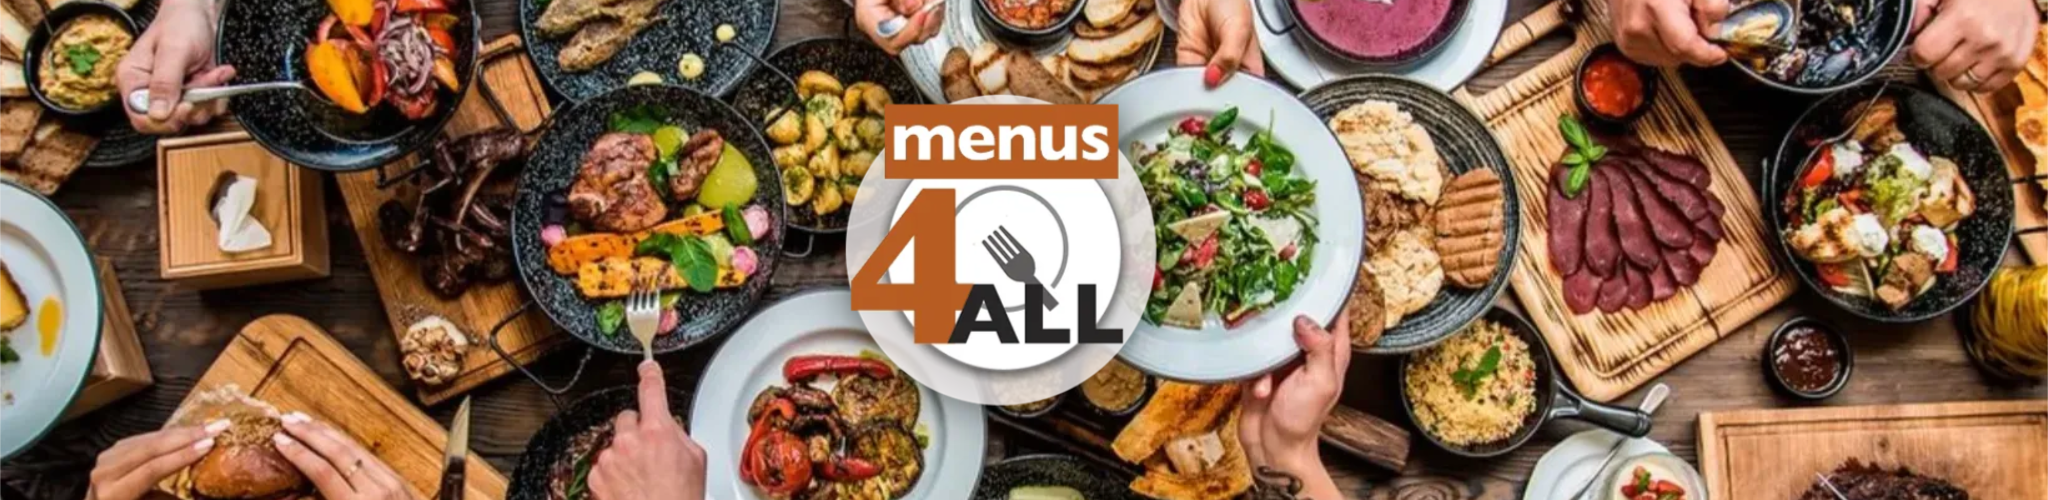 4 friends sharing a meal with Menus 4 ALL logo